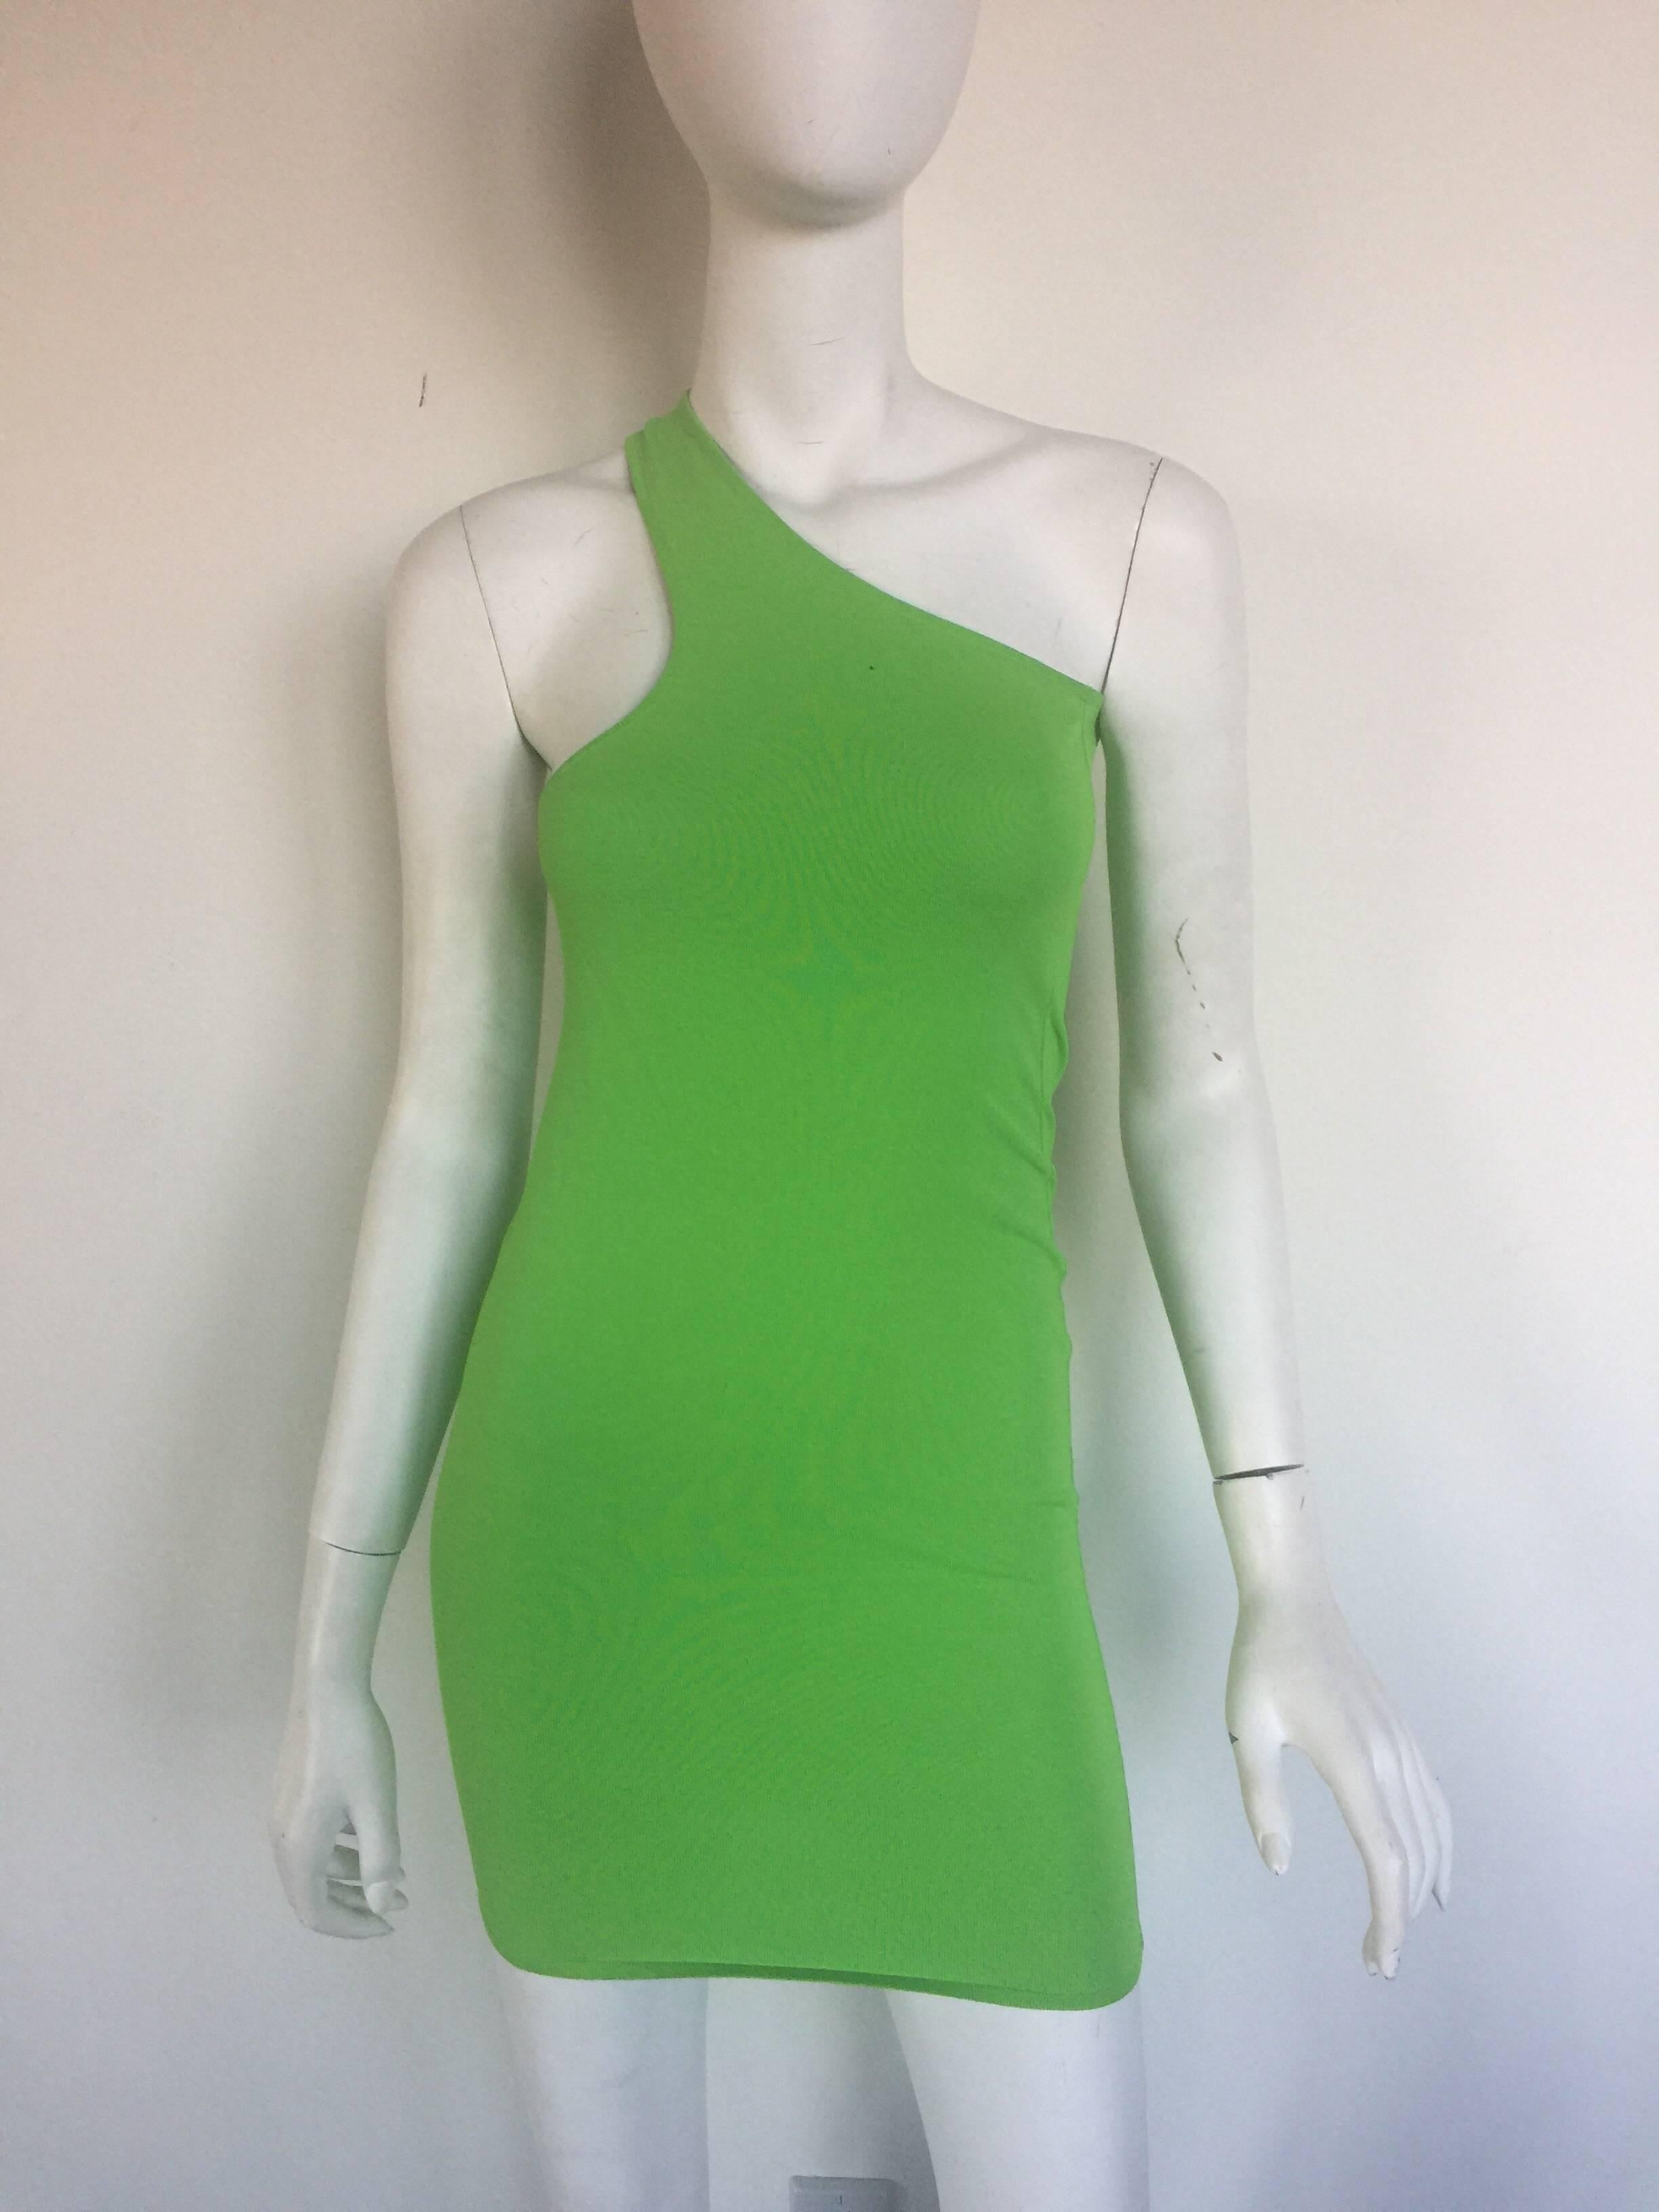 This classic Gianni Versace bandage mini dress is lime green.  It has a one shoulder cut out style top and one or two small snags in fabric but overall in great condition.  It is a size 38/4.